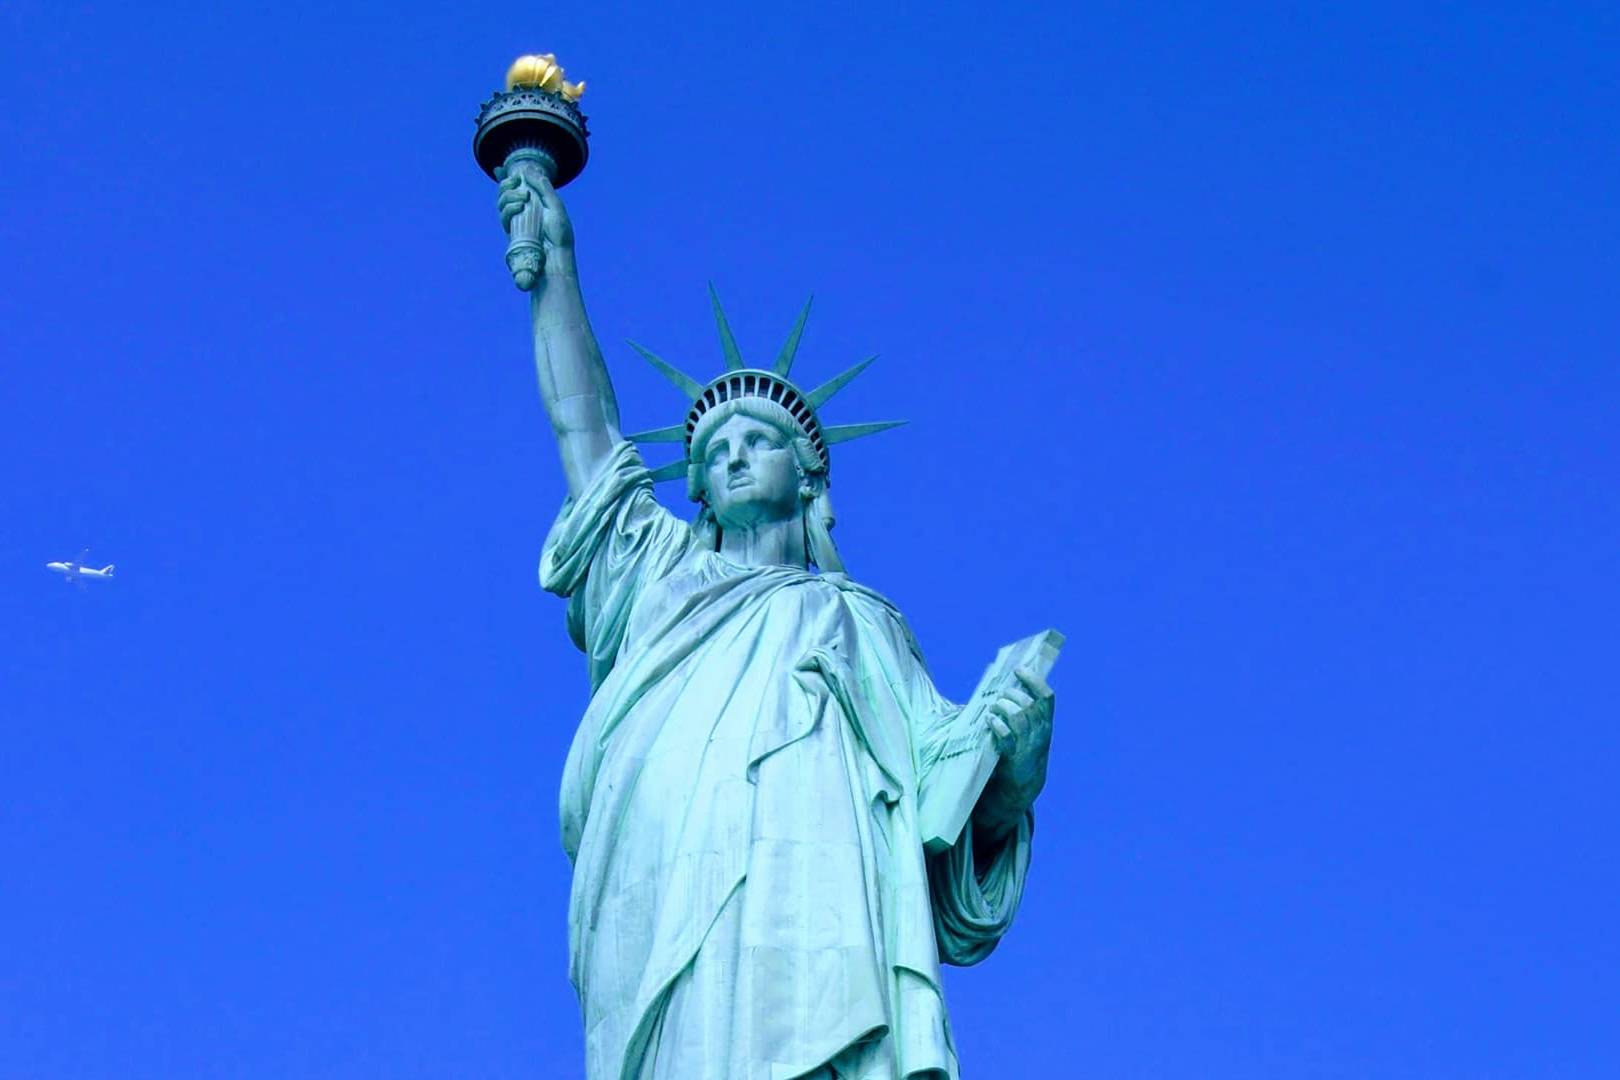 a statue of liberty in new york